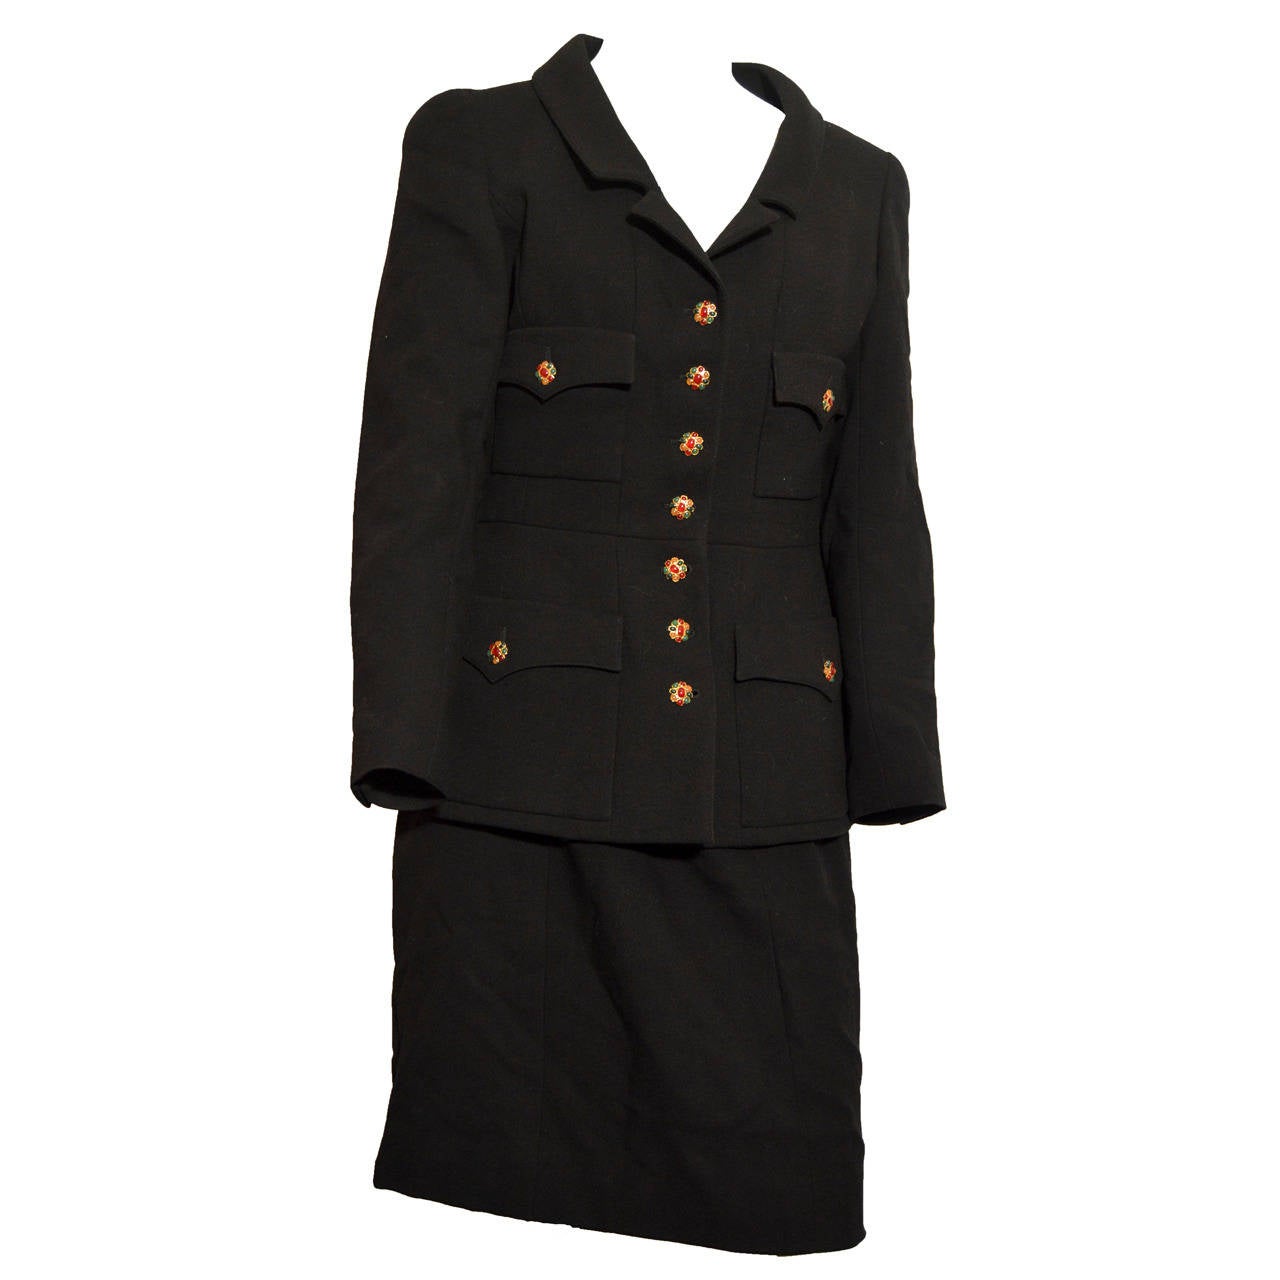 This black wool suit from Chanel has a notched collar, Princess seams and elegant Gripoix buttons. There are 4 front pockets with arched covers and 3-button cuffs. The suit is tagged a size 42.